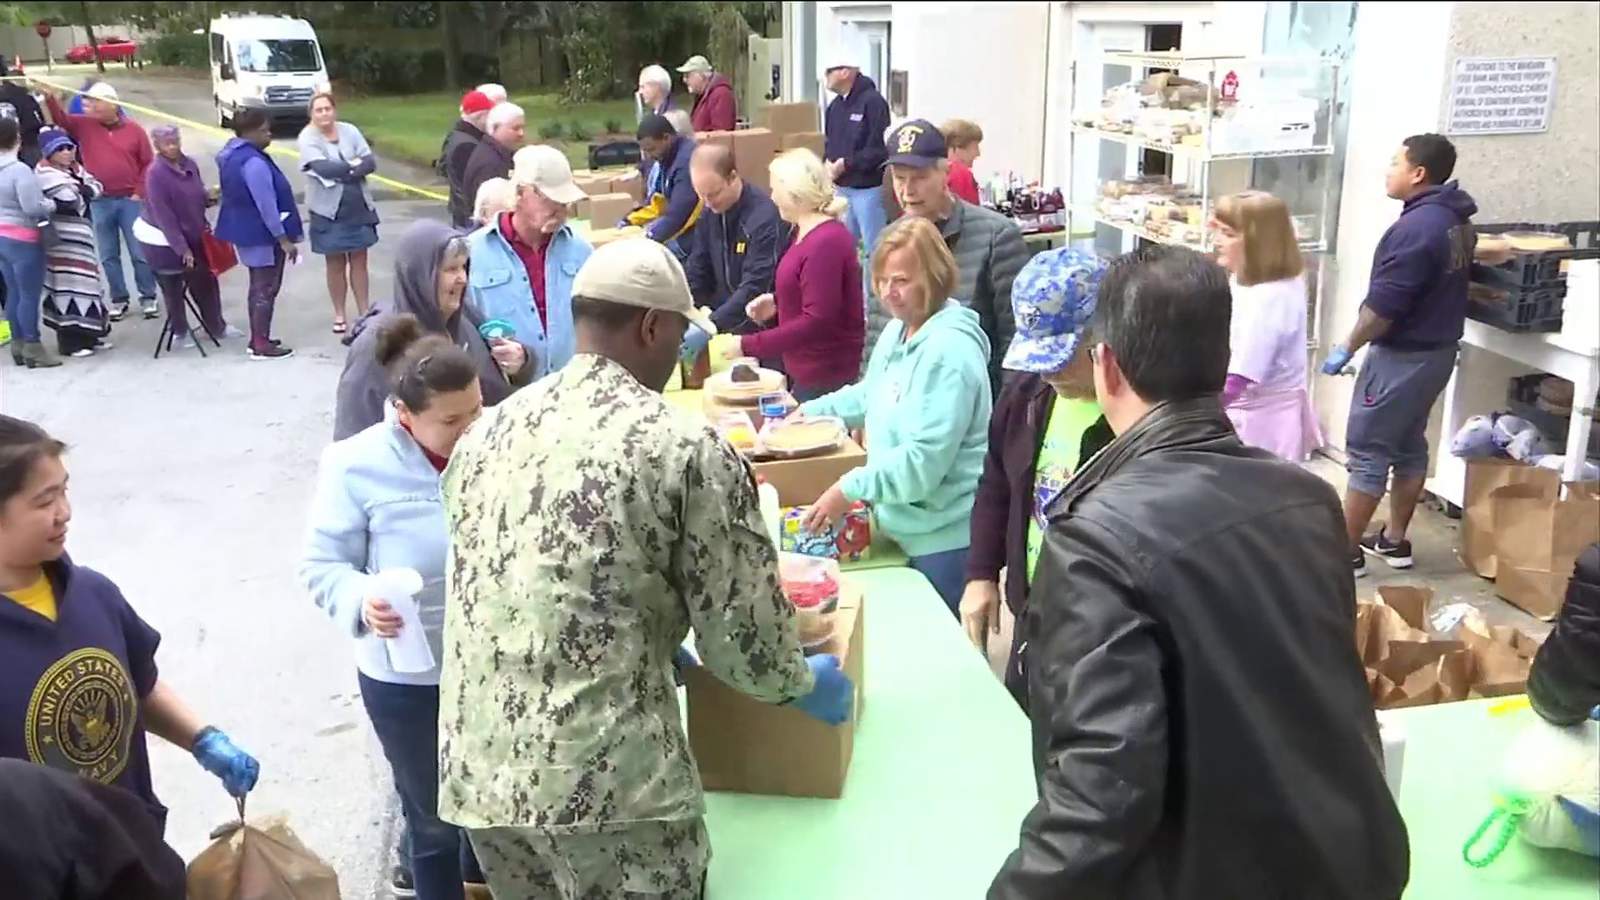 Dozens wait overnight for Thanksgiving meal from Mandarin Food Bank